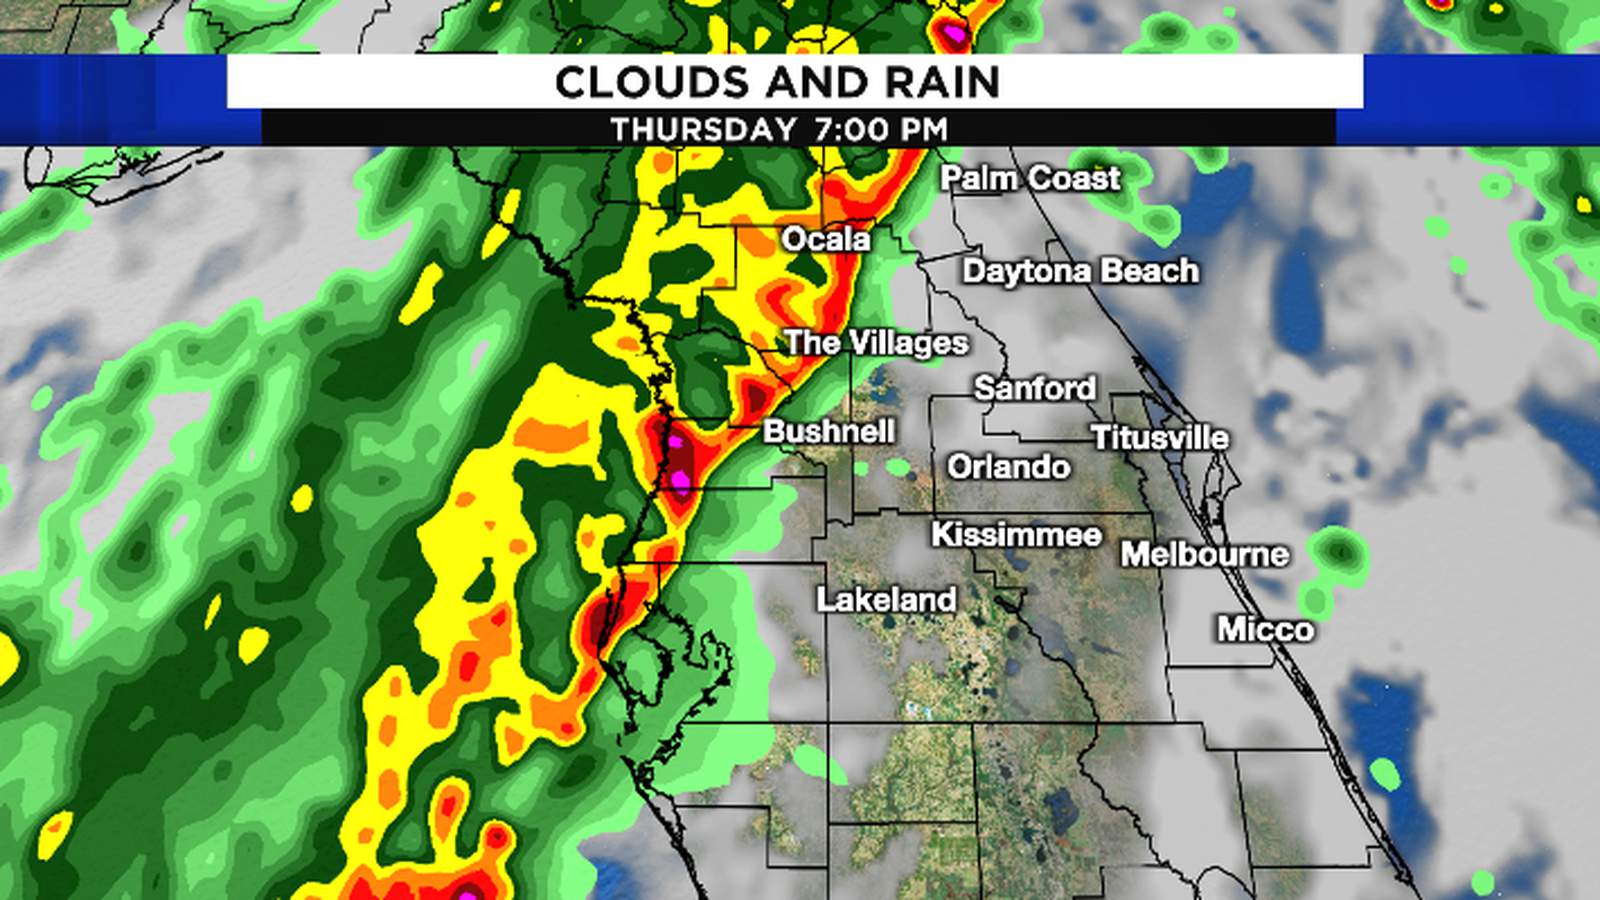 LIVE RADAR: Here’s when you can expect storms on Christmas Eve